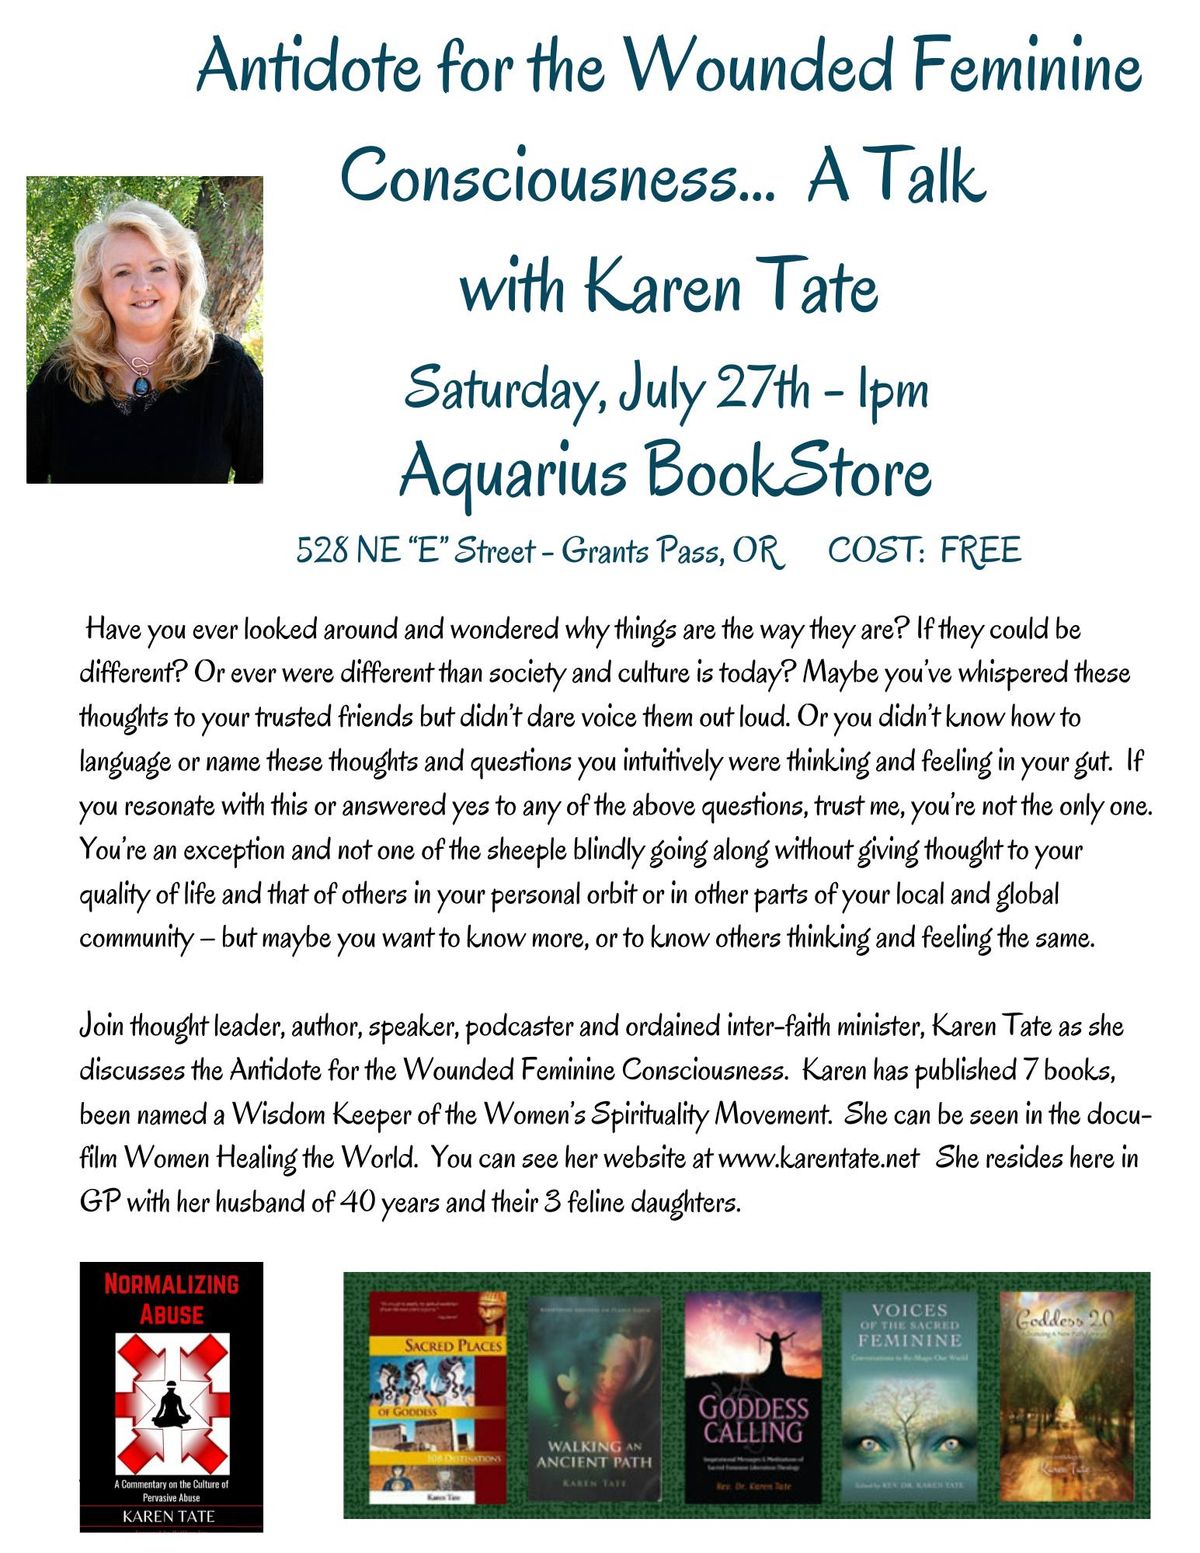 Antidote for the Wounded Feminine Consciousness - A Talk with Karen Tate @  Aquarius Books in GP